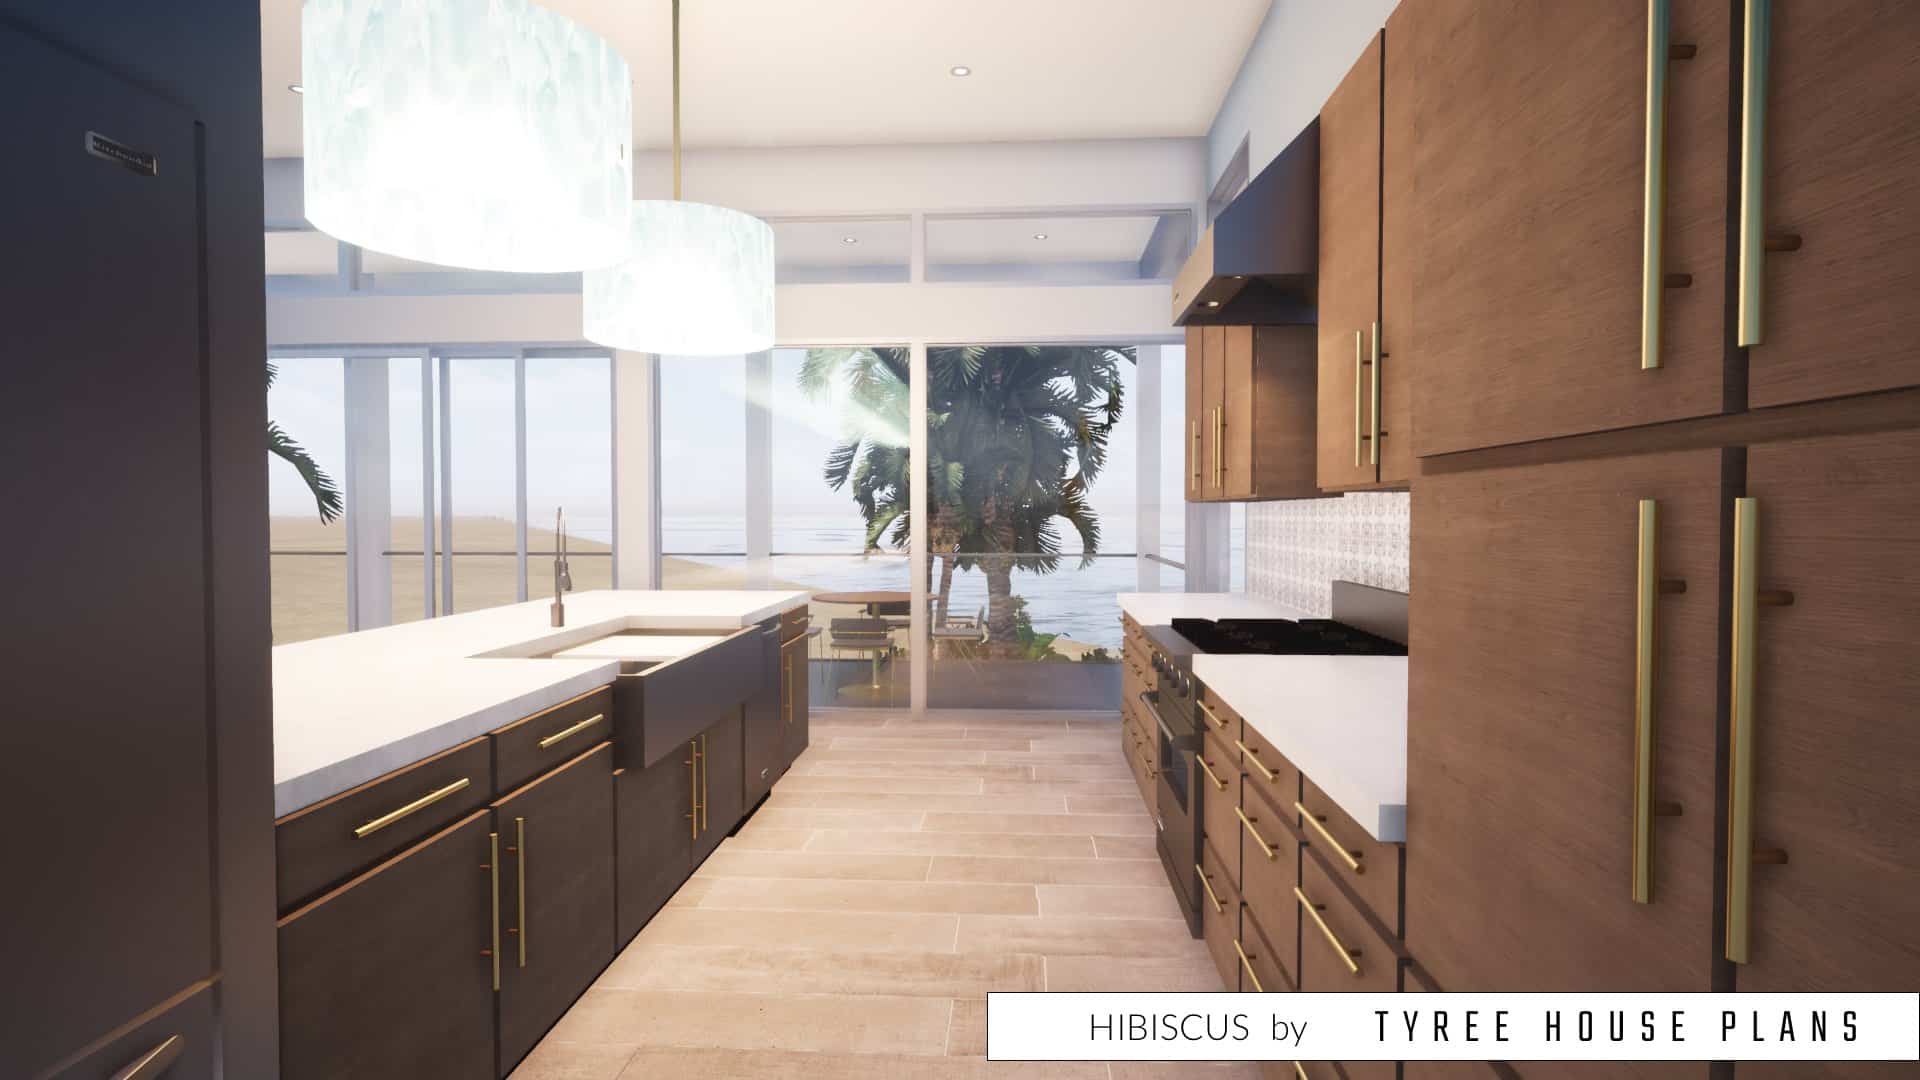 Galley kitchen with gas range. Hibiscus by Tyree House Plans.